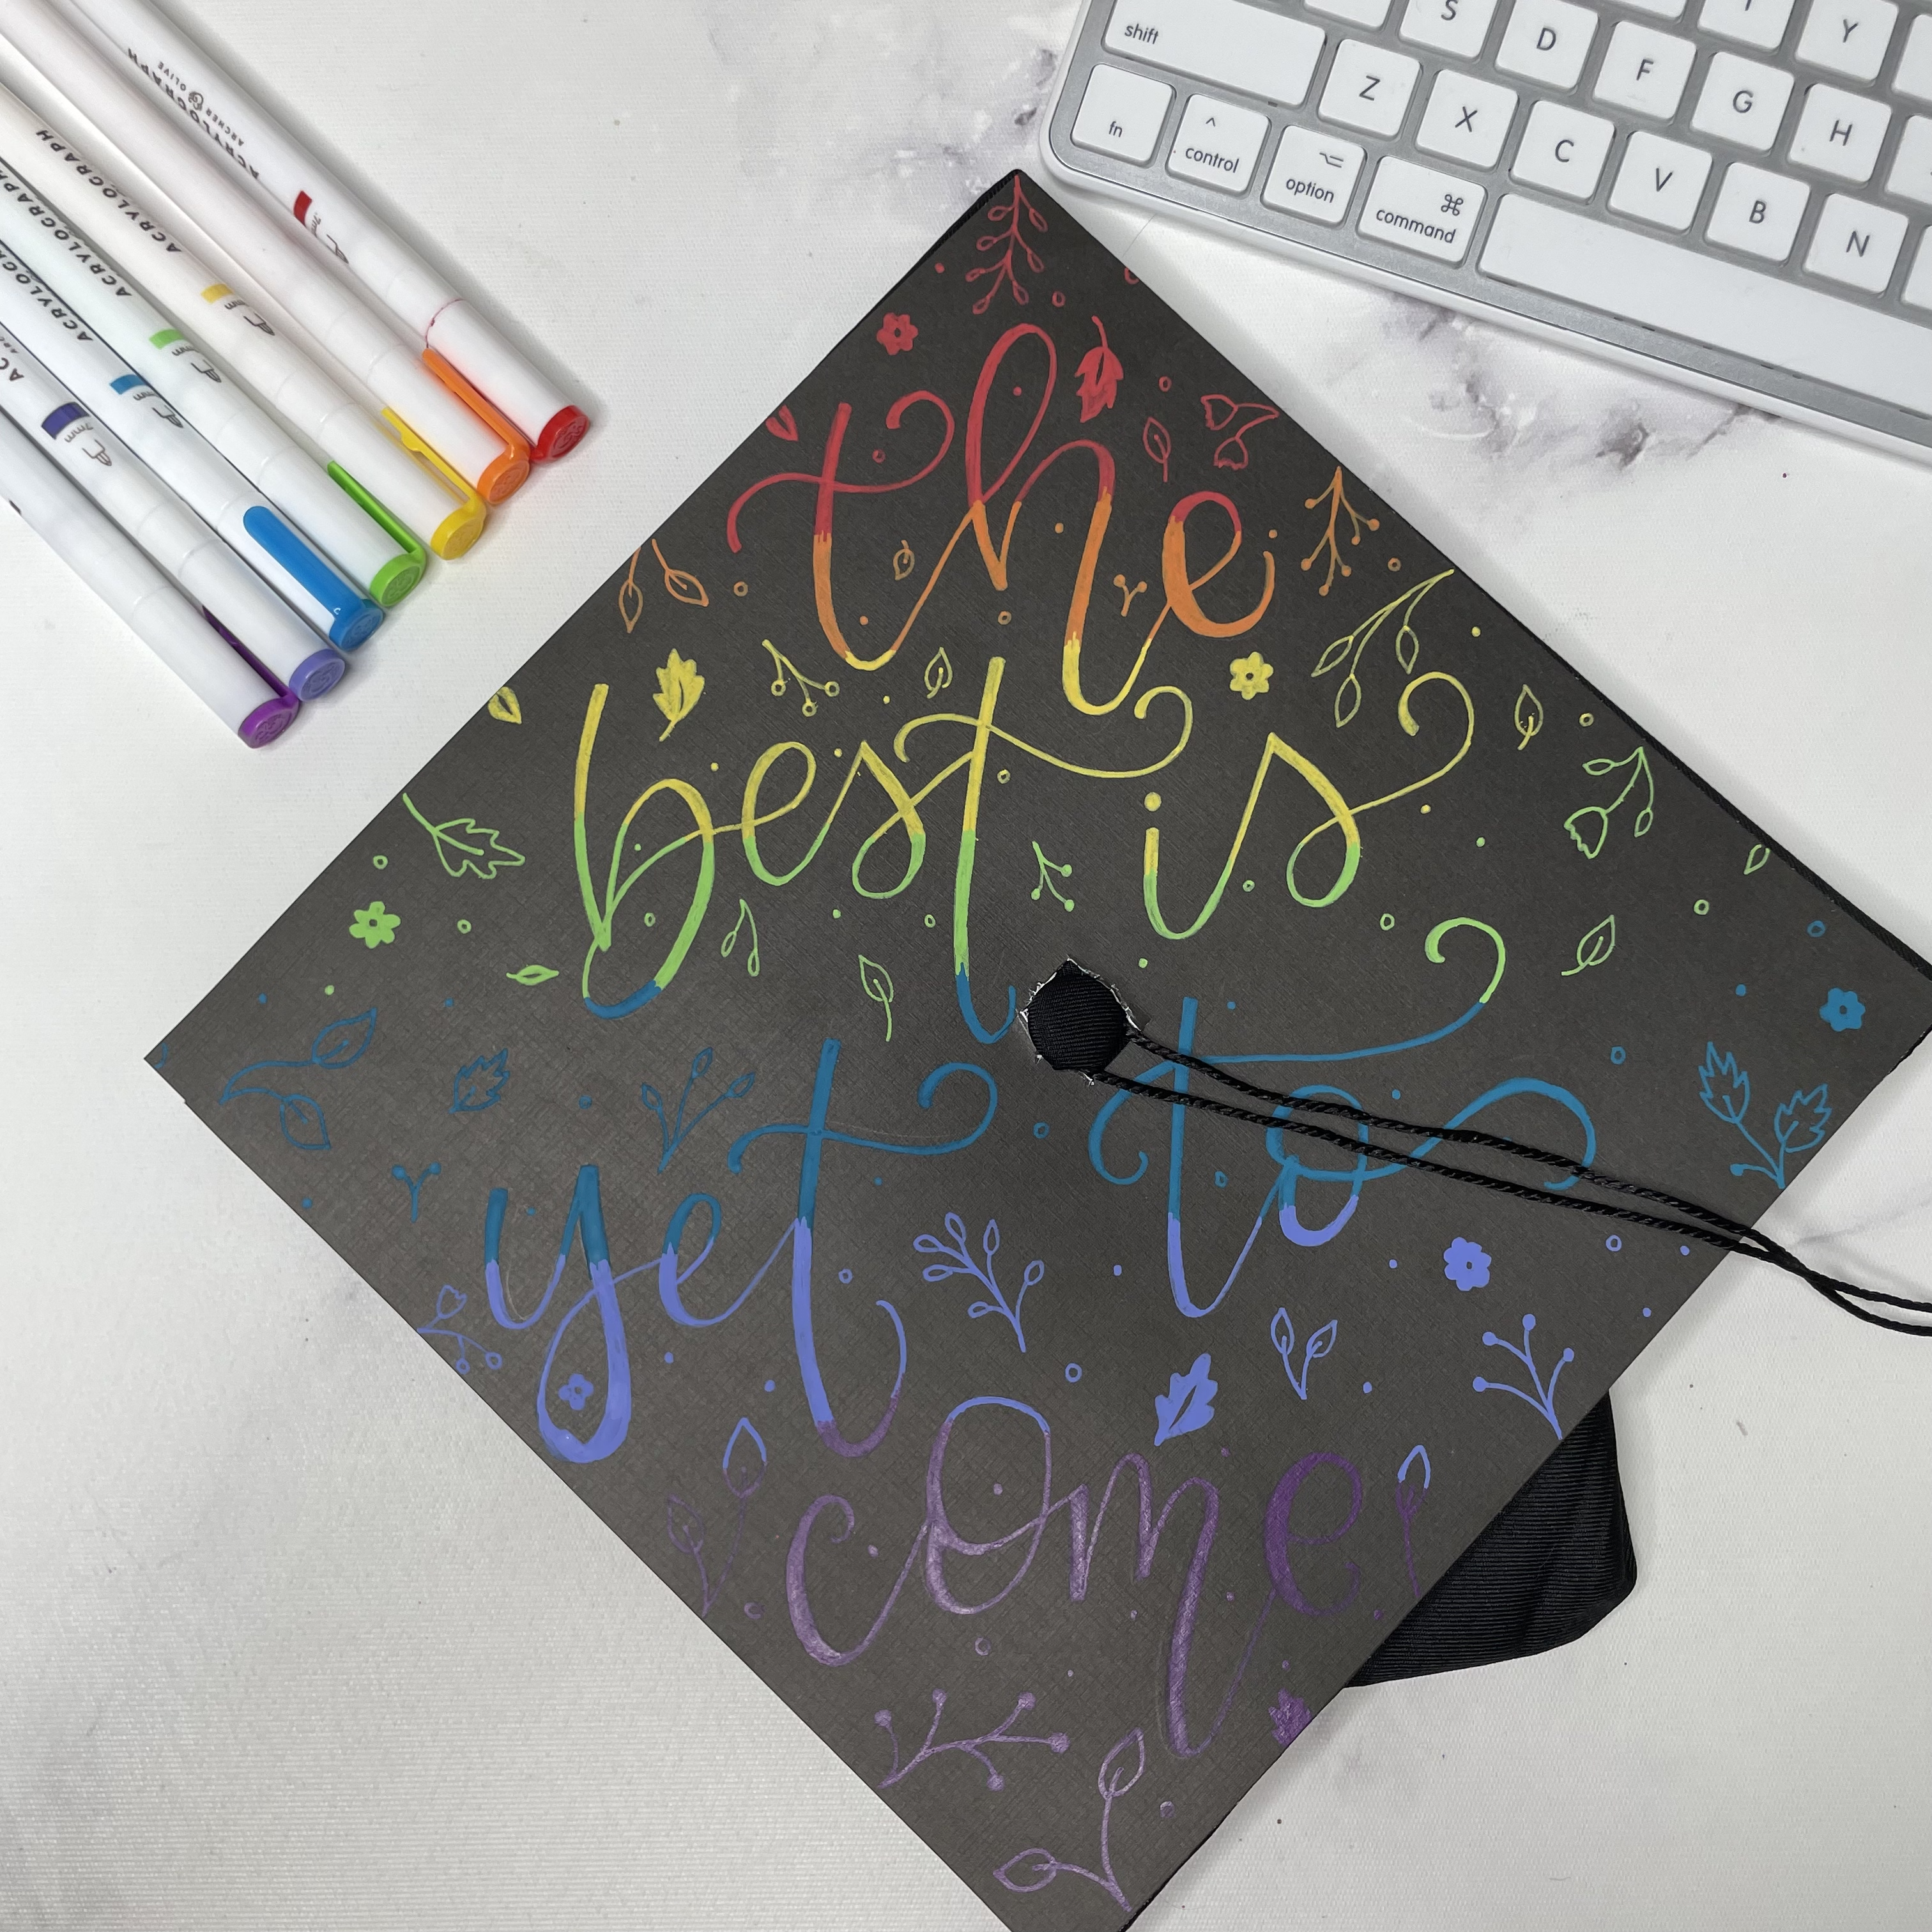 Quote "the best is yet to come" on a black graduation cap in rainbow lettering